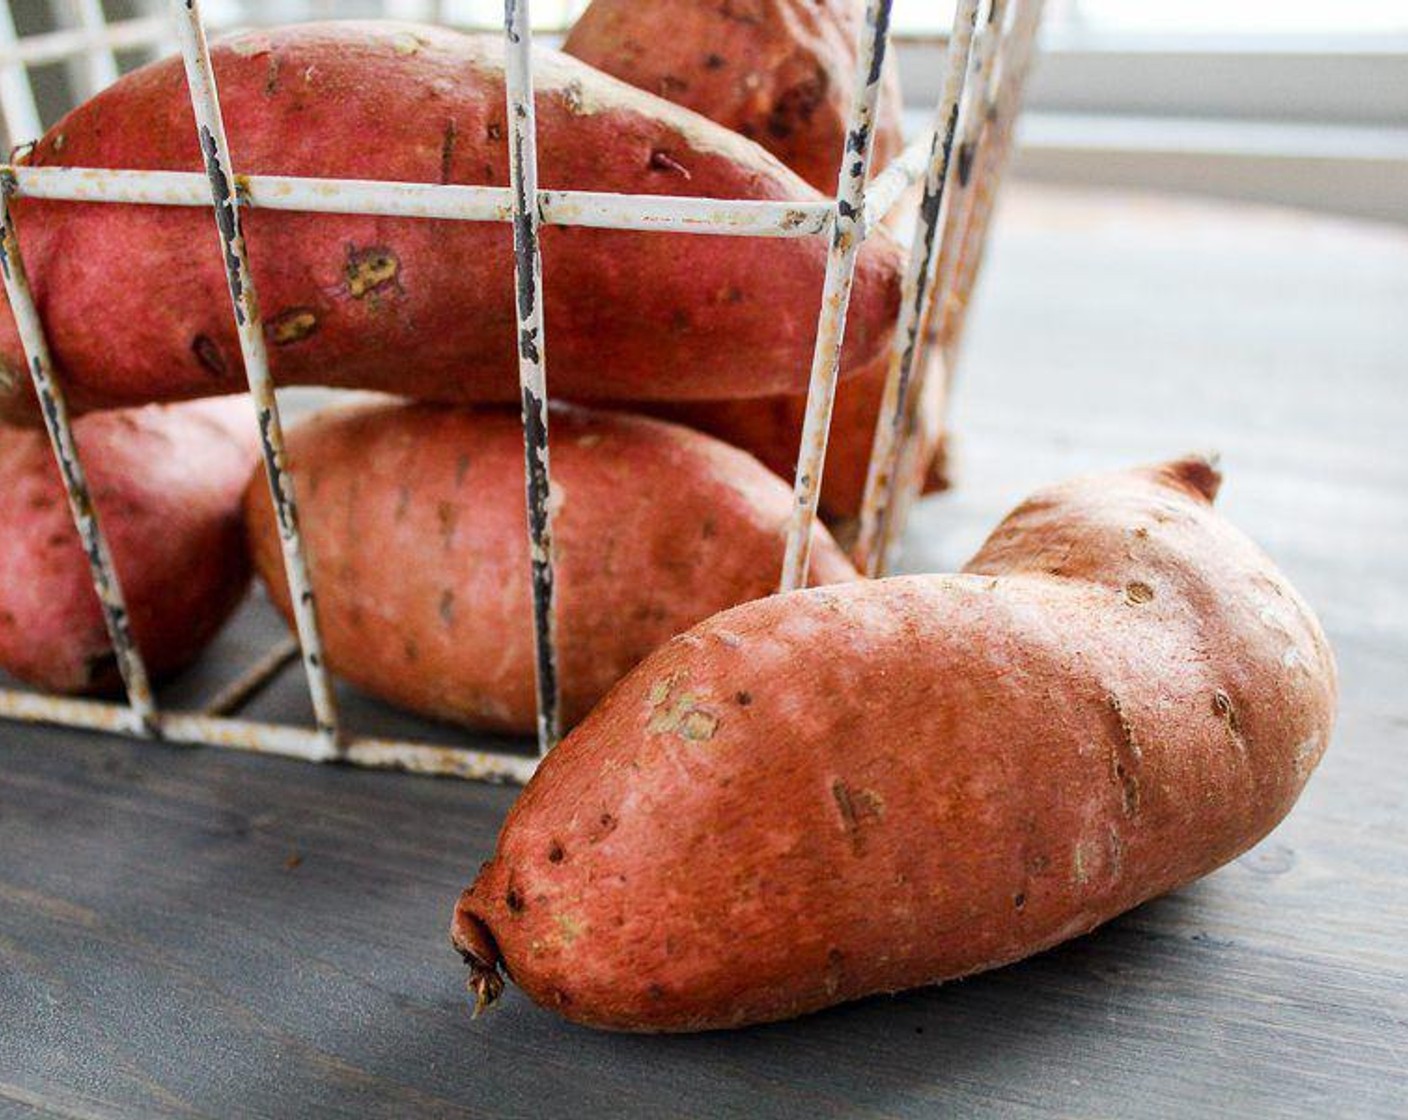 step 2 Wash the sweet potatoes and dry them well. Place 4 of the Sweet Potatoes (4) onto a baking sheet and bake for 1 hour. Set aside to cool. Reduce heat to 375 degrees F (190 degrees C).